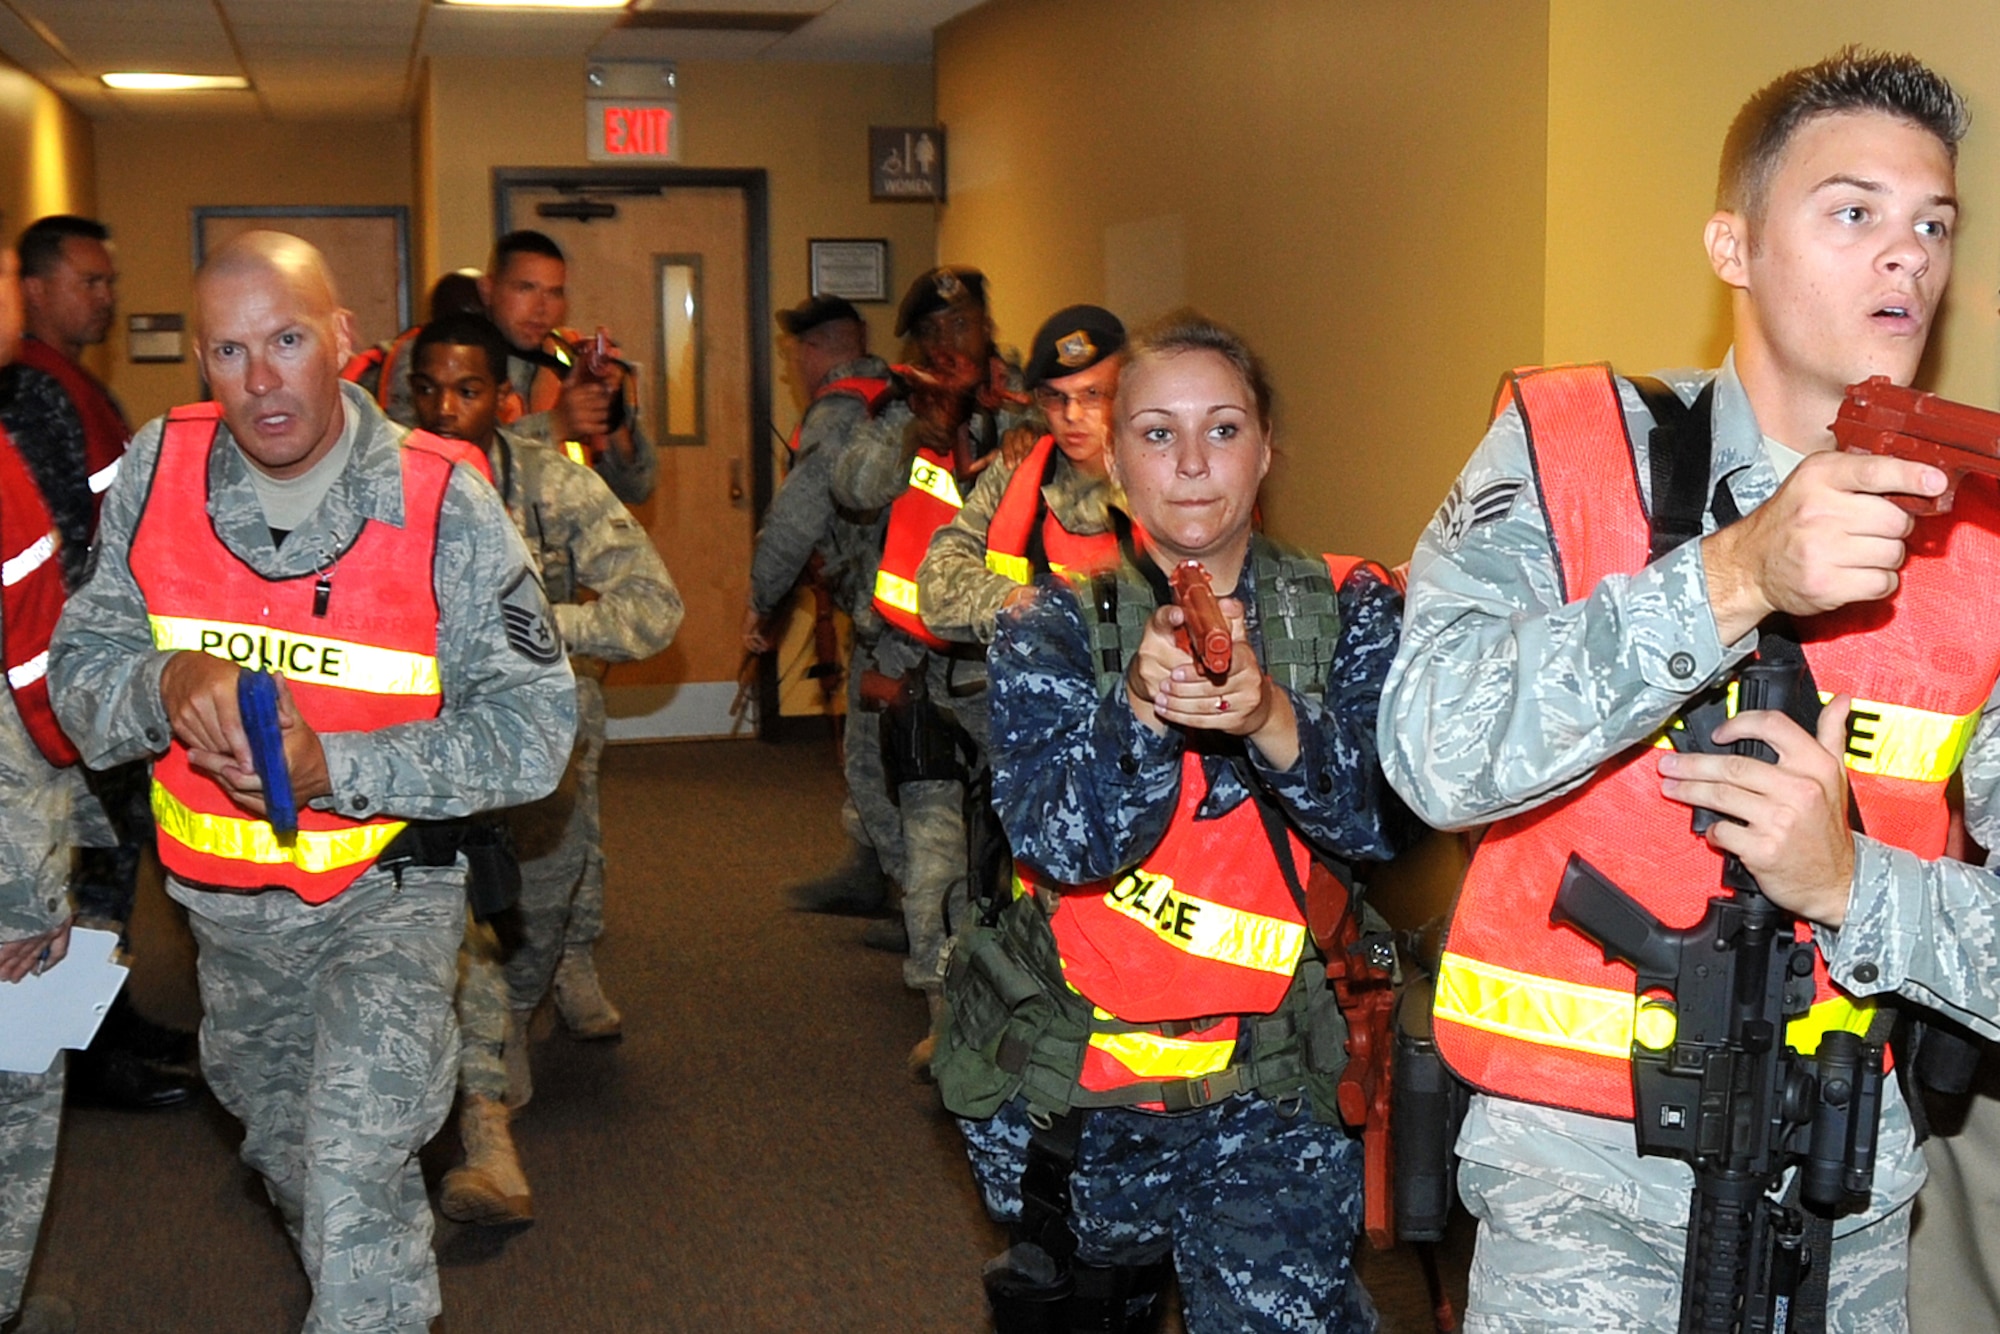 OFFUTT AIR FORCE BASE, Neb. - Members of the 55th Secrurity Forces Squadron walk secure a hallway in the base's main customer support building as part of an active shooter exercise Sept. 10.  Team Offutt's first responders conduct various exercise scenarios throughout the year to prepare for possible threats to people and resources. U.S. Air Force Photo by Jeff W. Gates